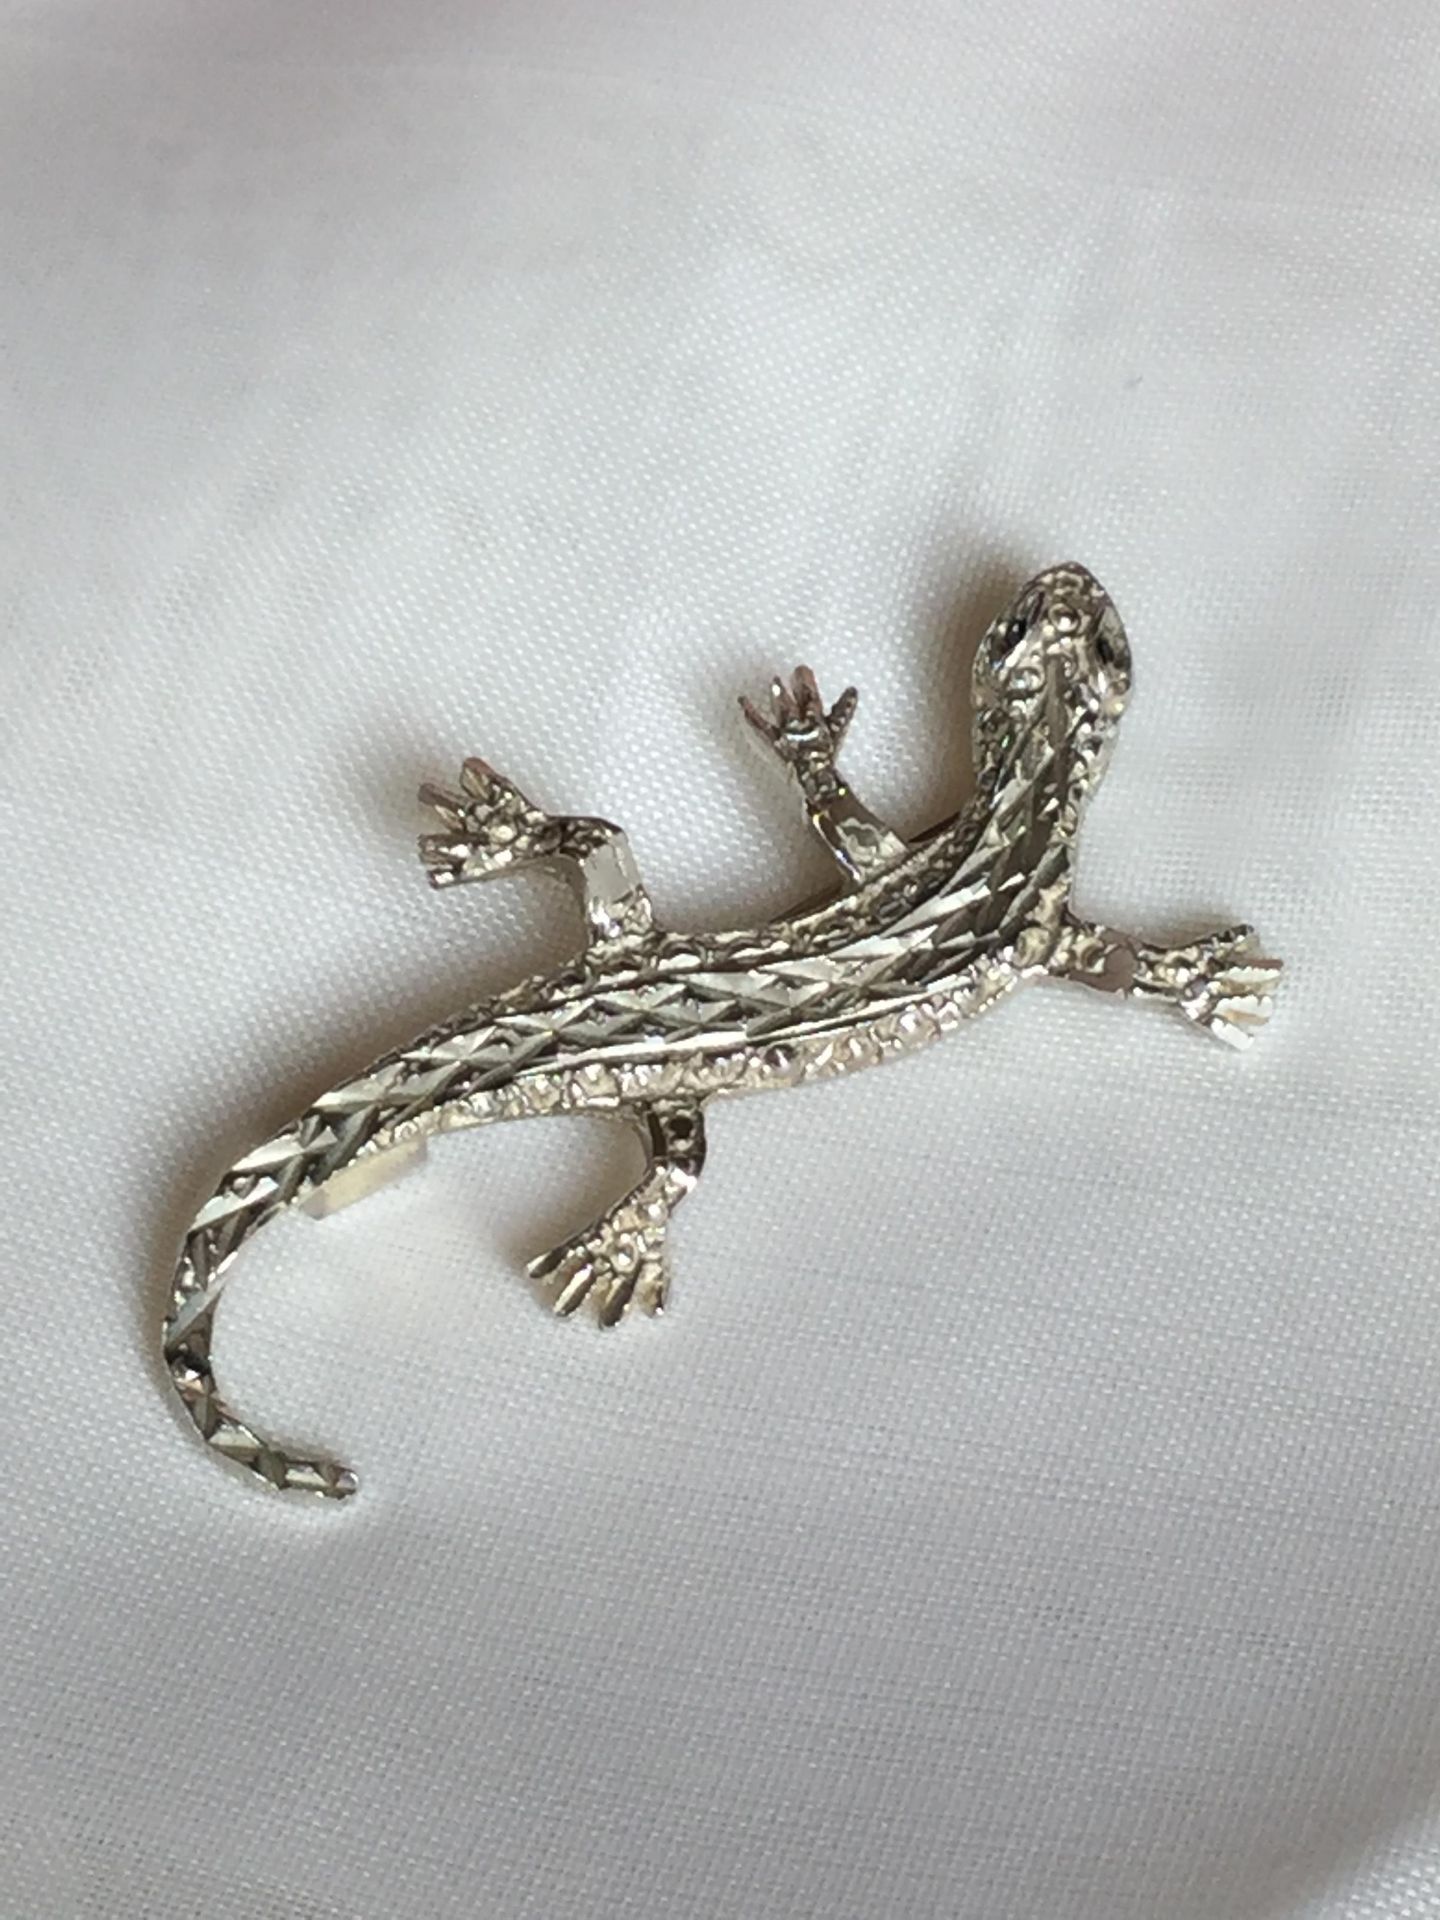 Silver Vintage Lizard Brooch with sparkly onyx eyes 4.10 grams - Image 5 of 7